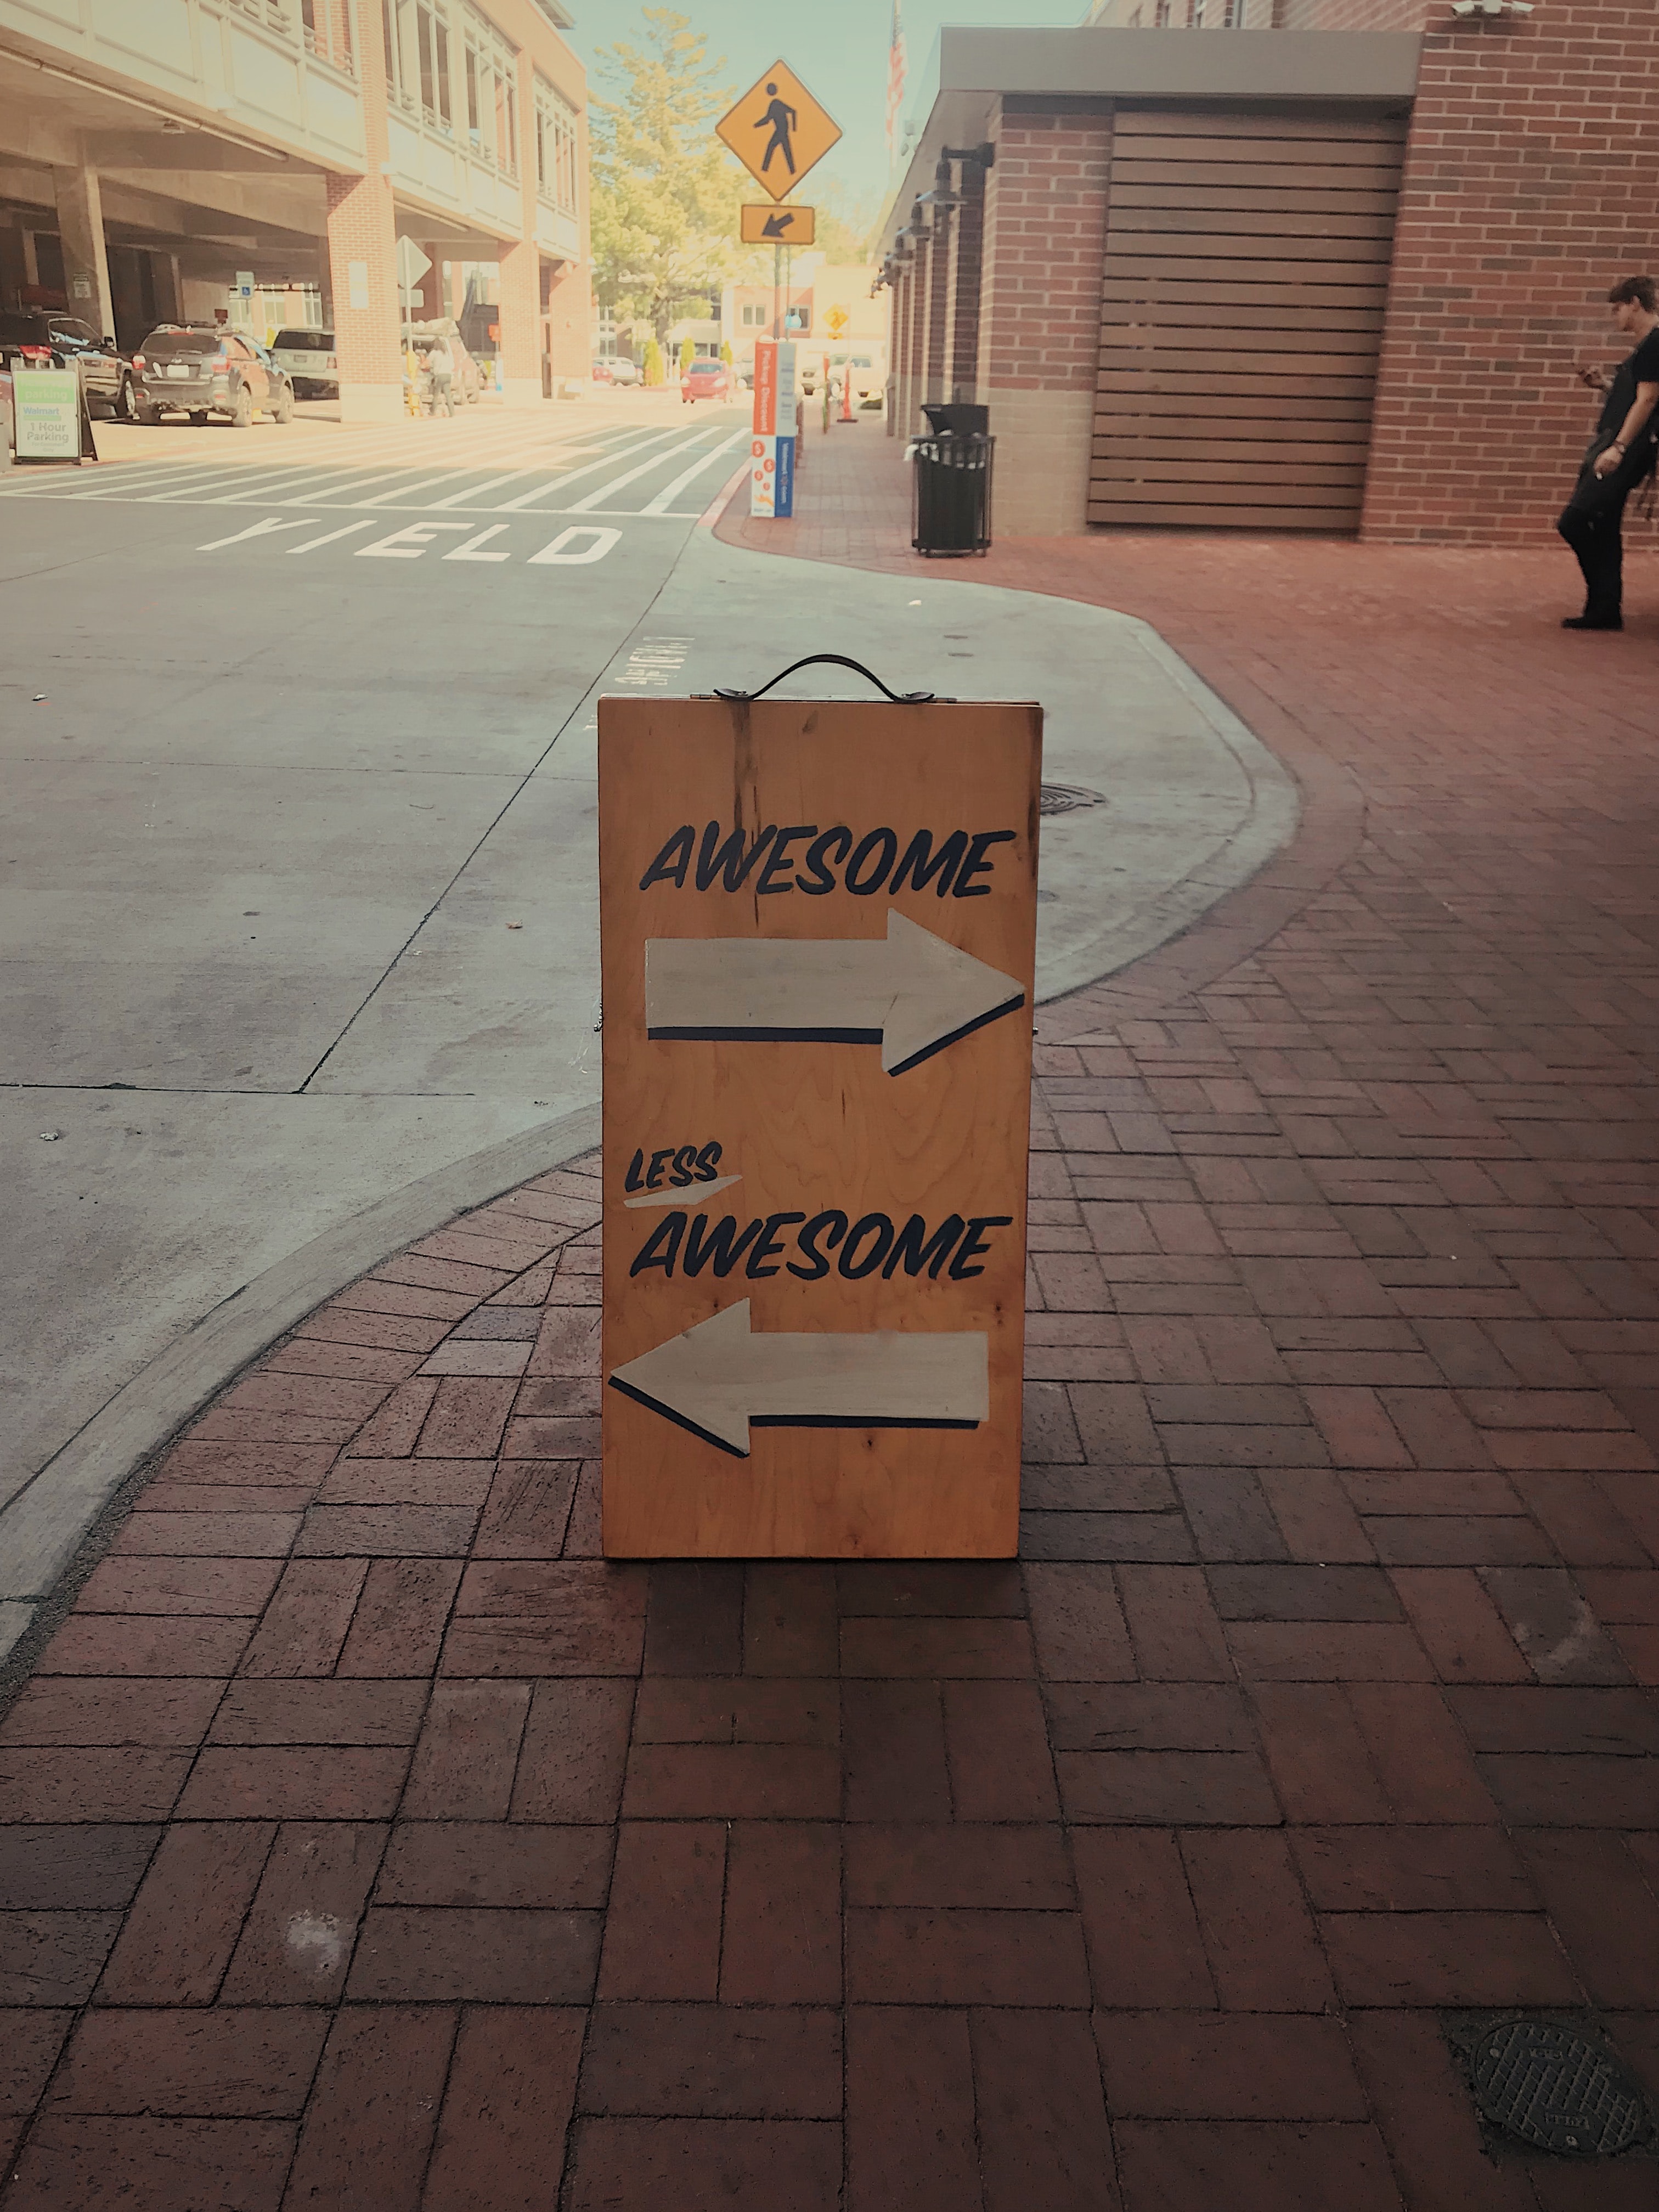 Sign on a road saying 'awesome' and 'less awesome'